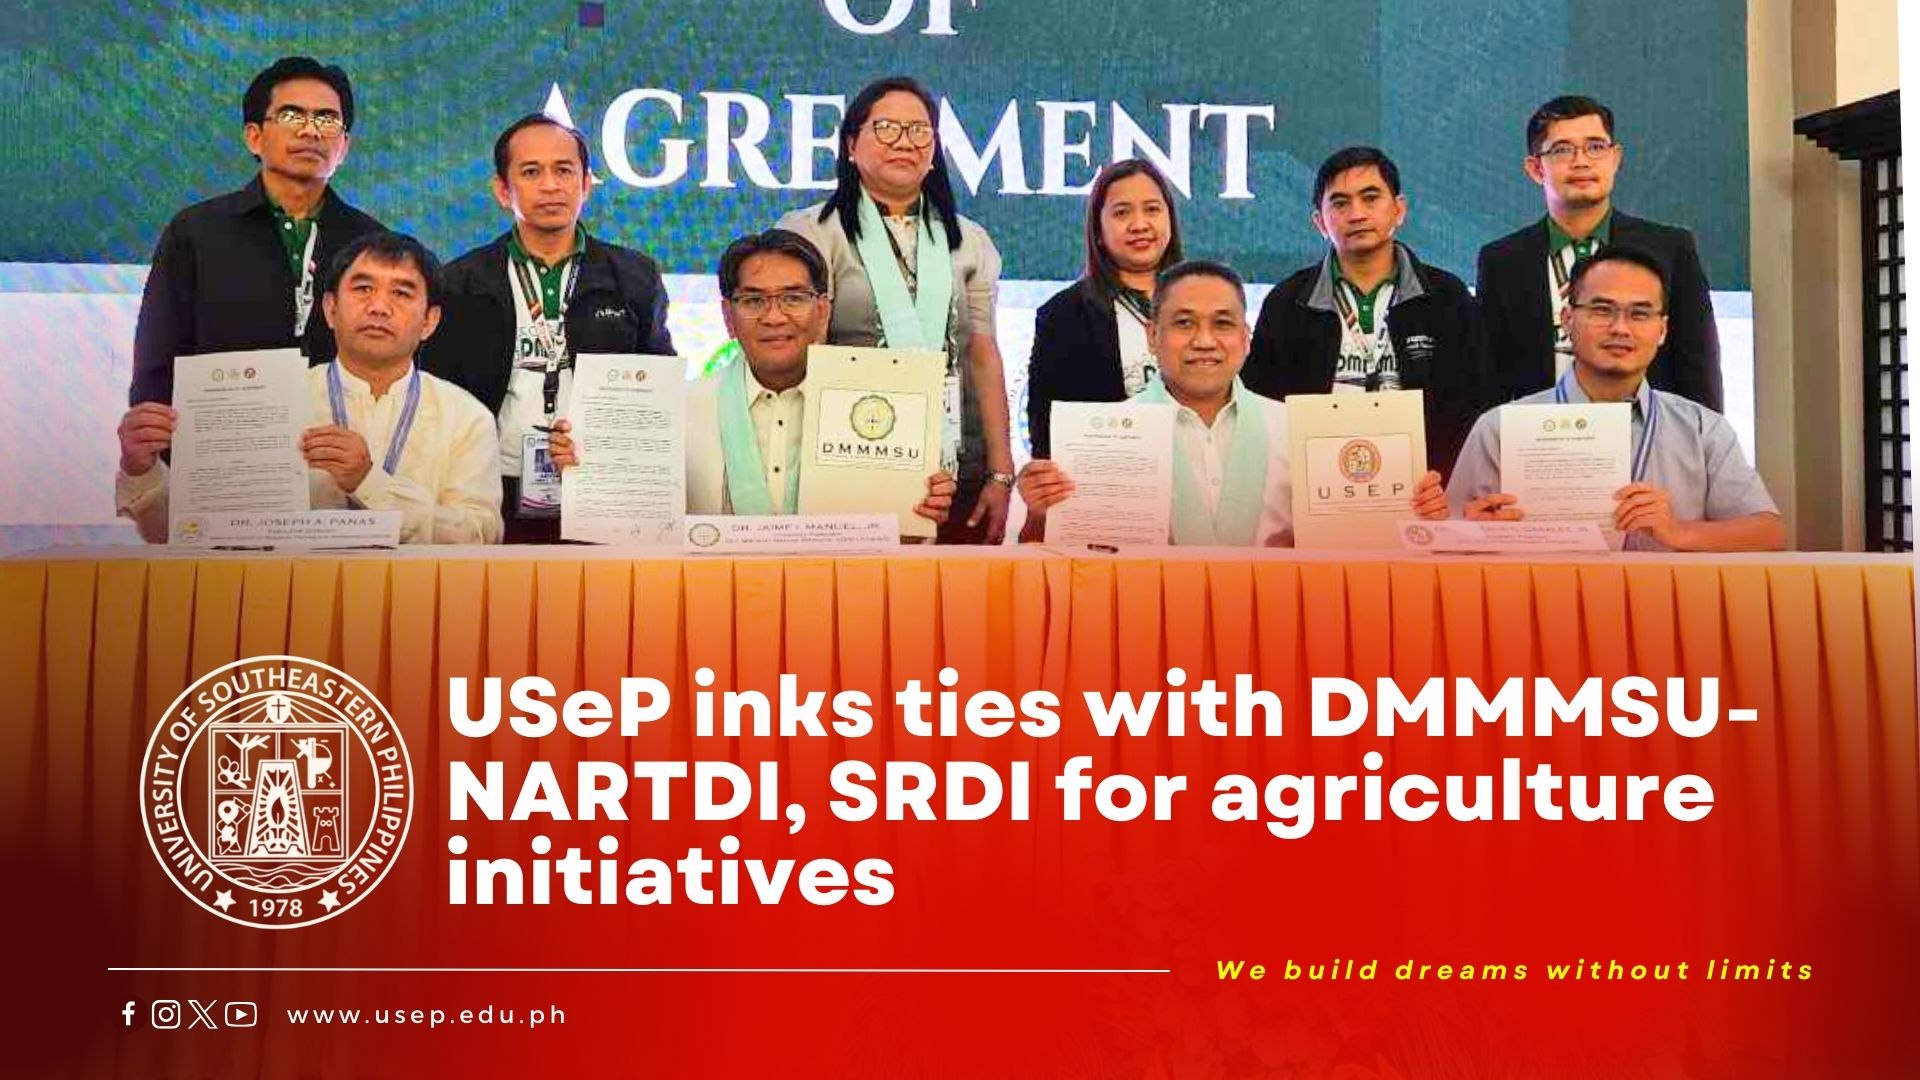 USeP inks ties with DMMMSU-NARTDI, SRDI for agriculture initiatives